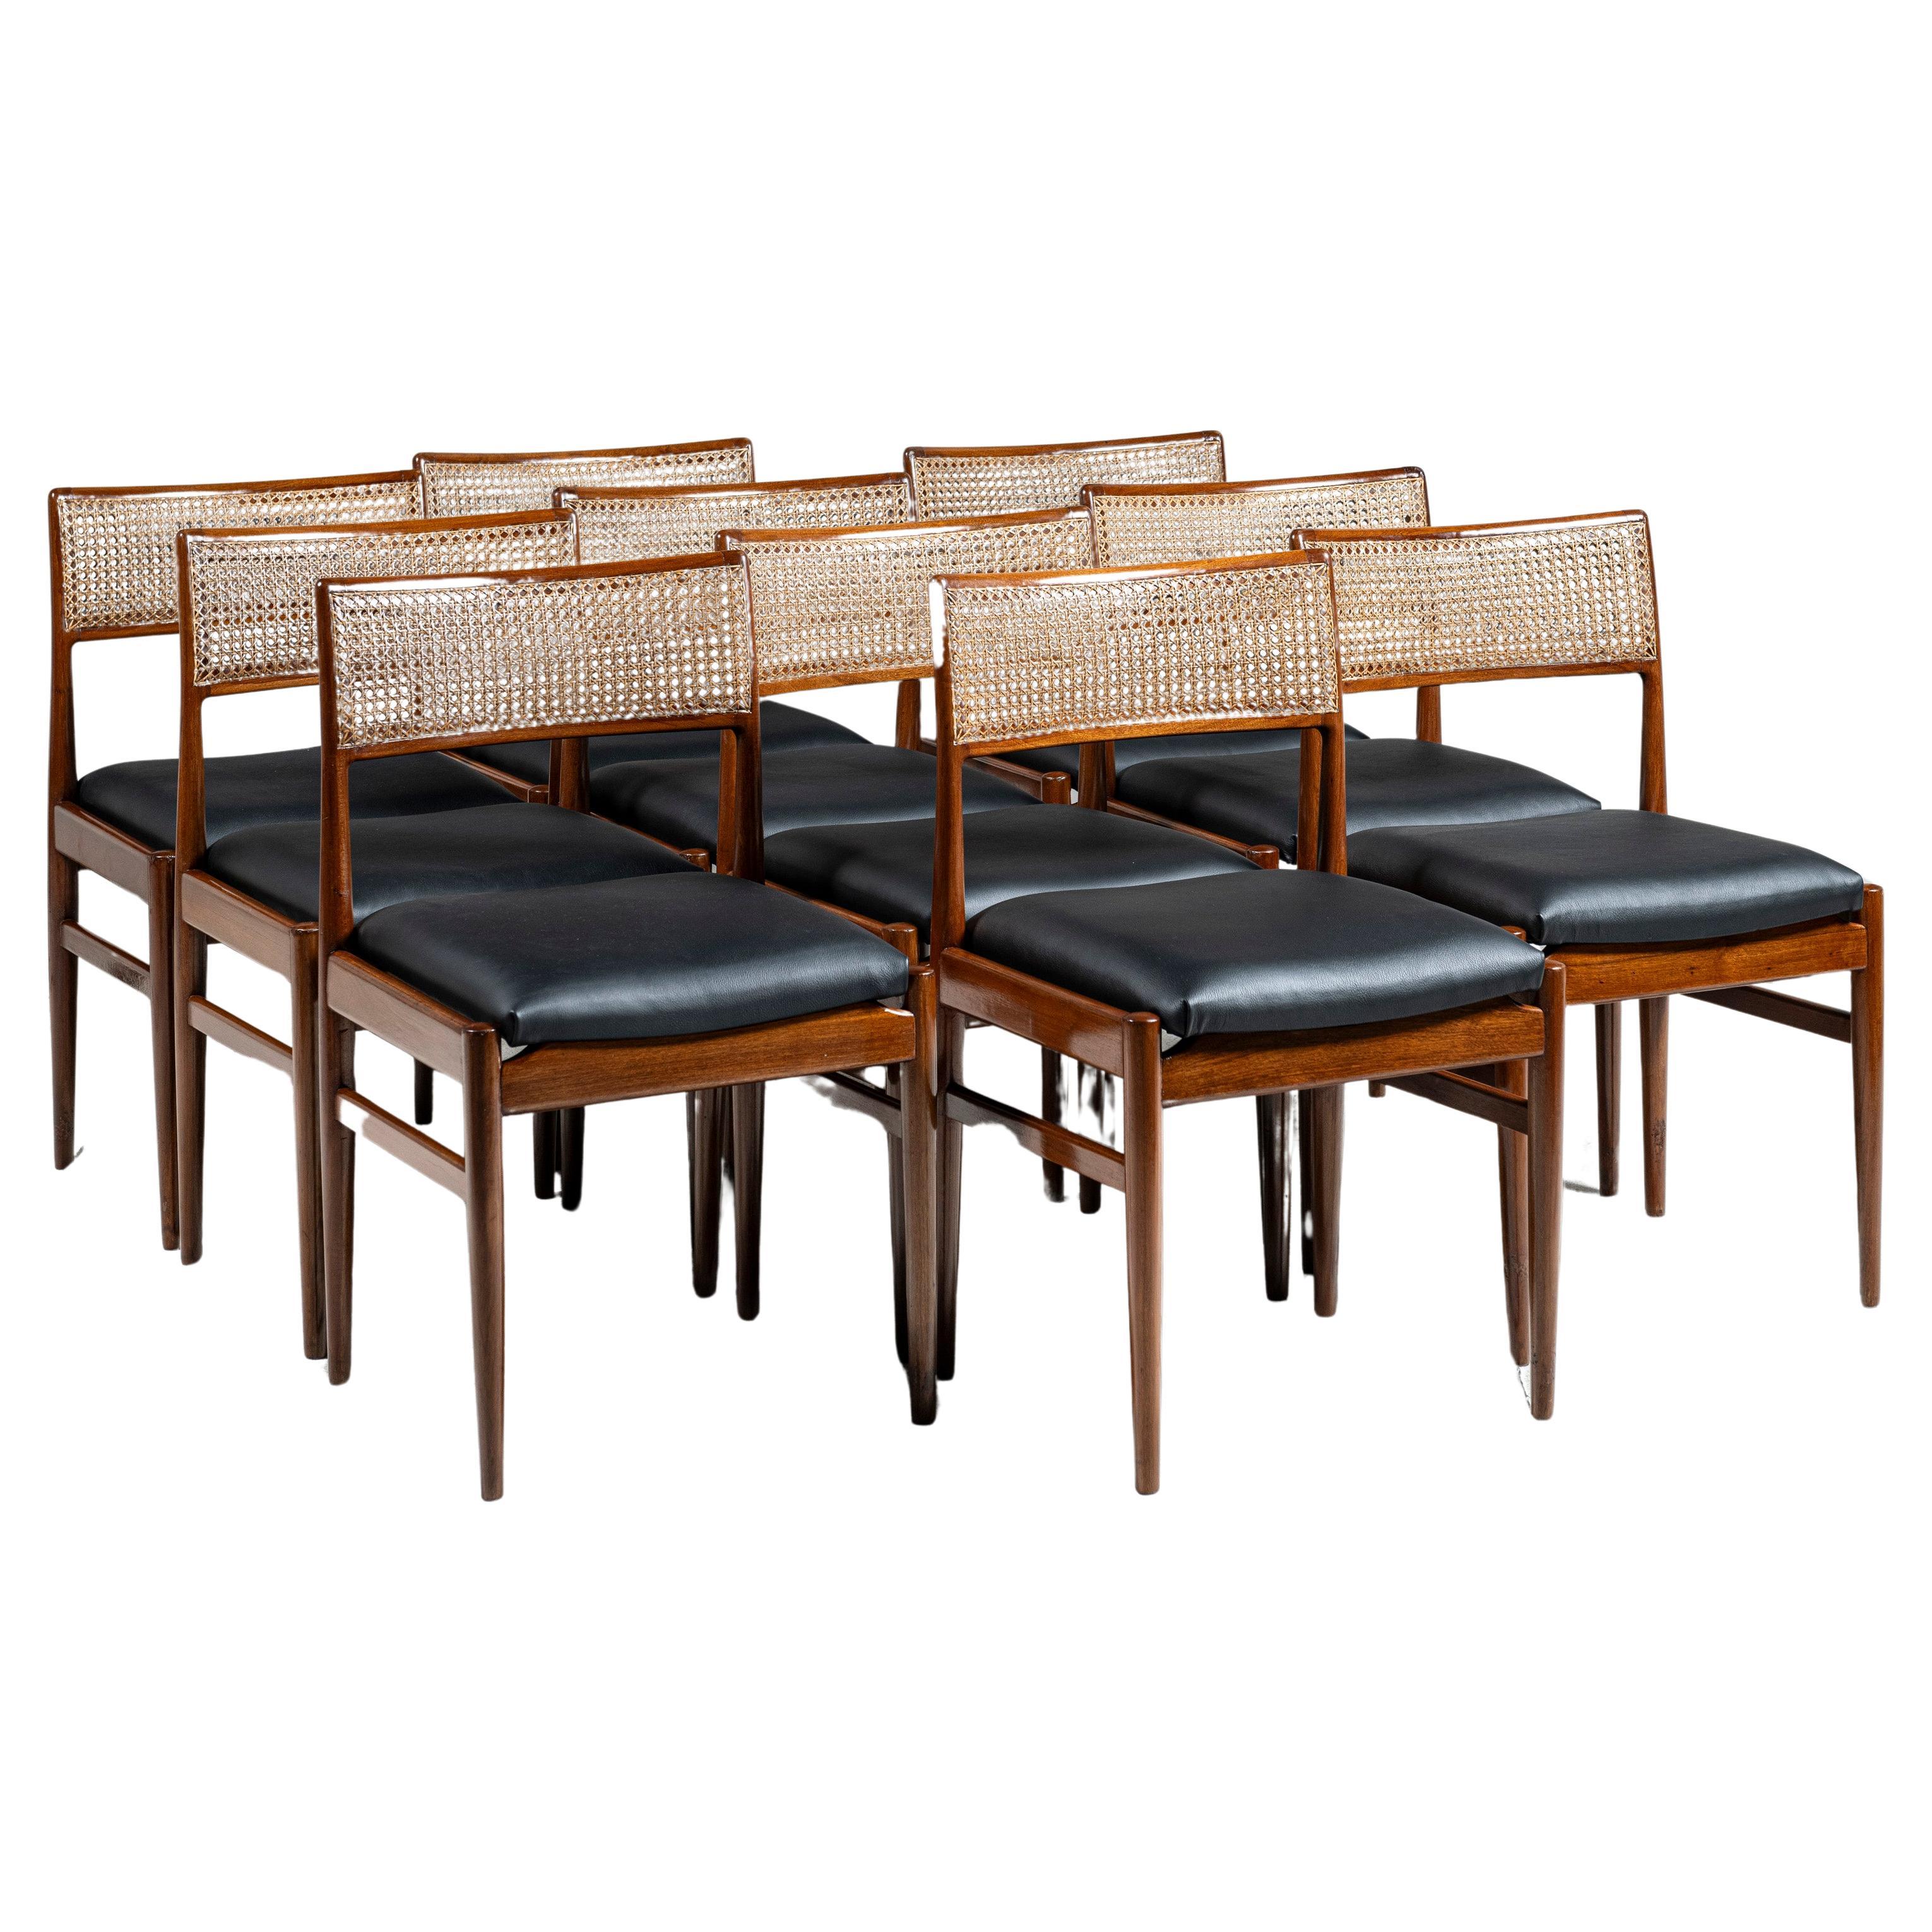 Set of Ten Dining Room Chairs Design by Erik Worts, Denmark, circa 1960. For Sale